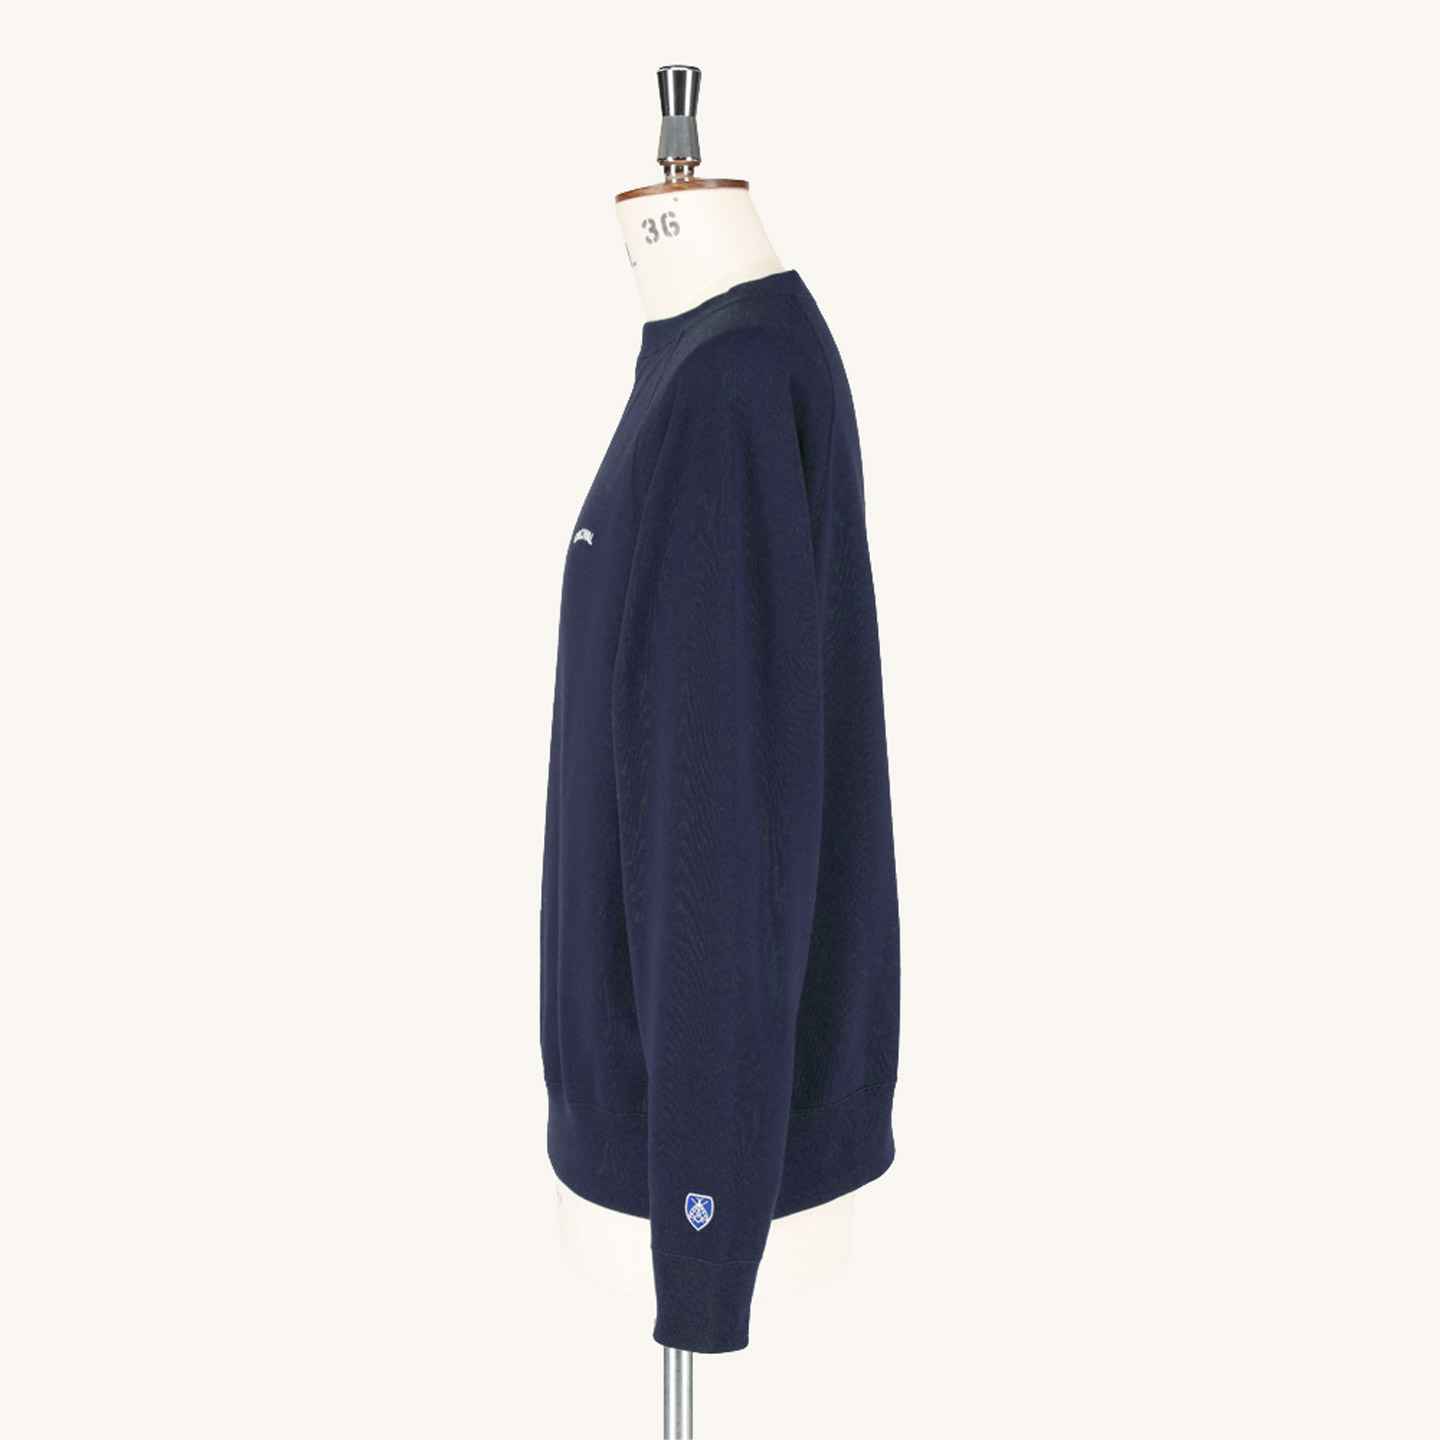 Mini French Terry Boat Neck Sweater Navy